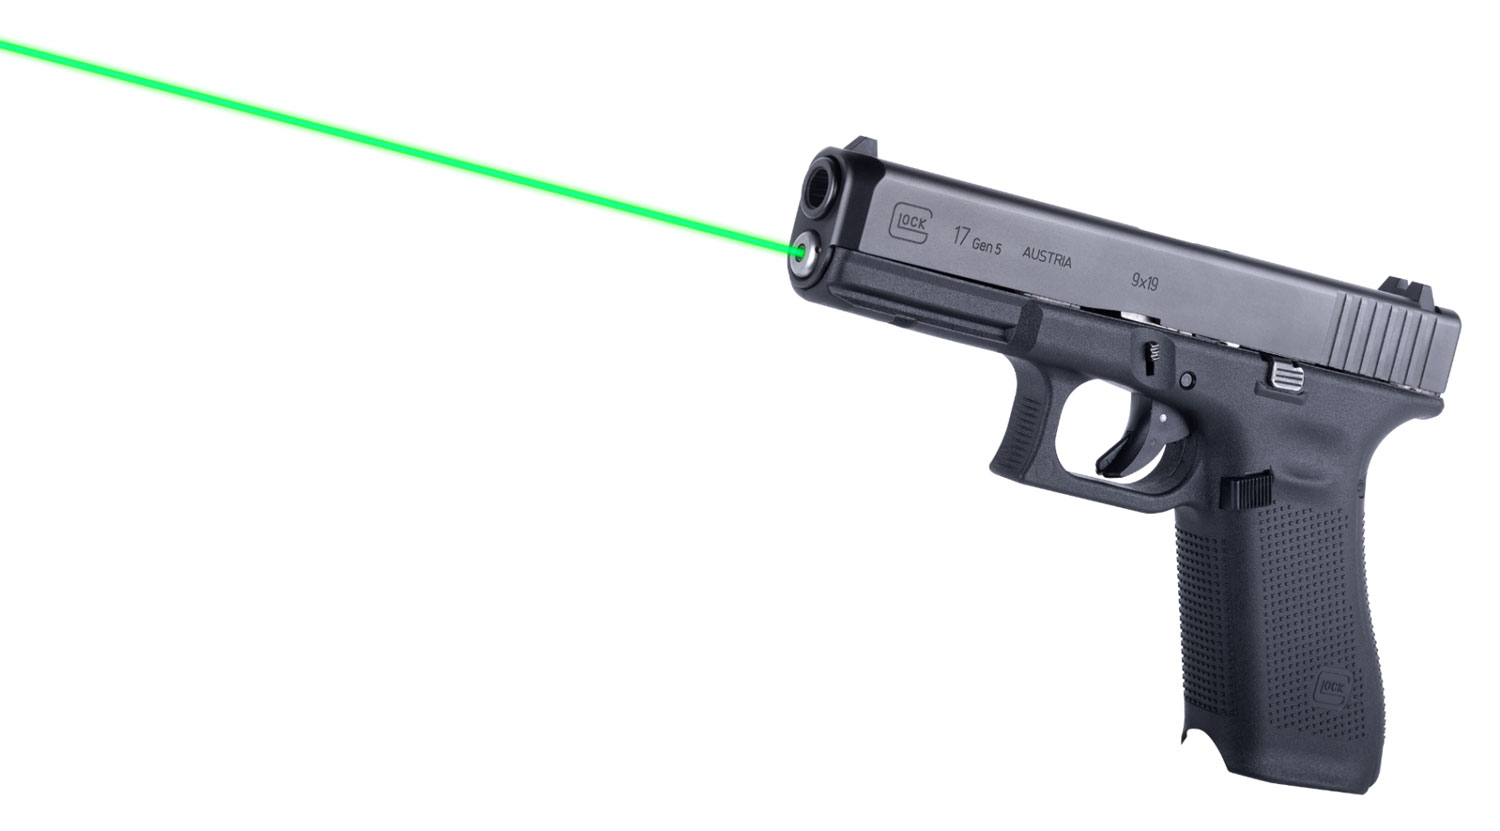 LaserMax LMSG517G Guide Rod Laser 5mW Green Laser with 520nM Wavelength & Made of Aluminum for  Glock 17, 17 MOS, 34 MOS Gen5